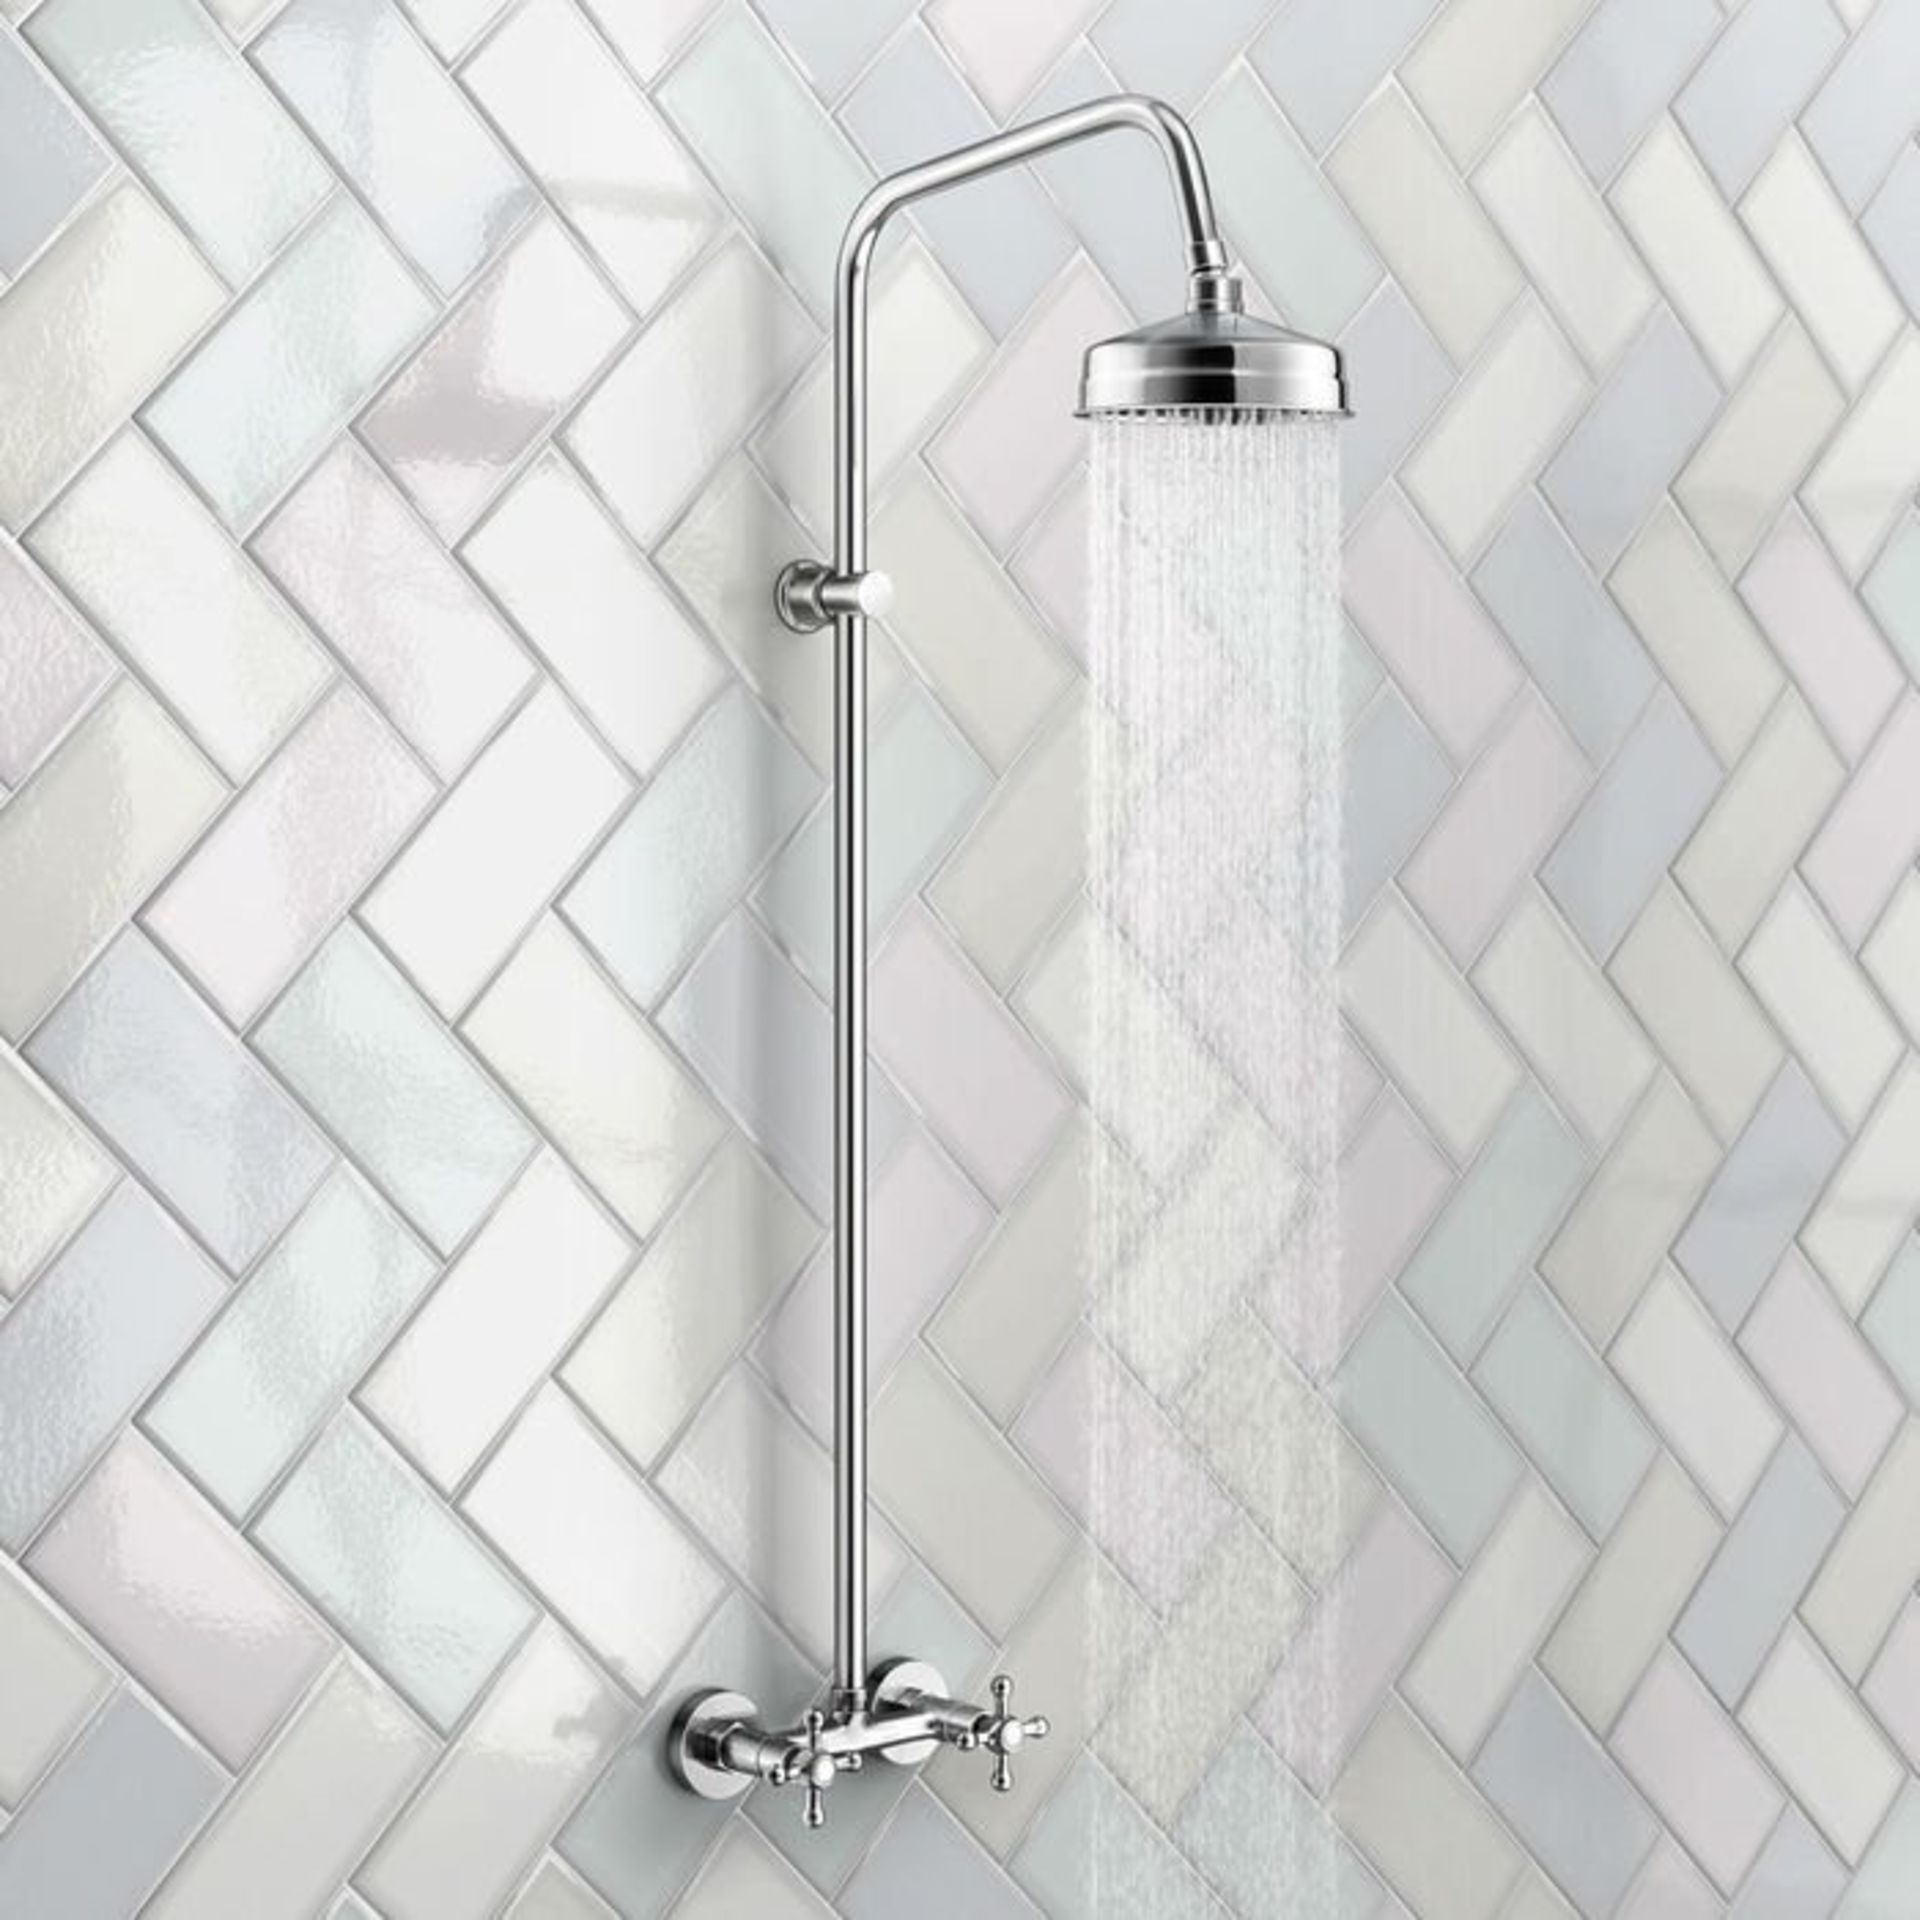 (G173) Traditional Exposed Shower Medium Head. RRP £249.99. Exposed design makes for a statement